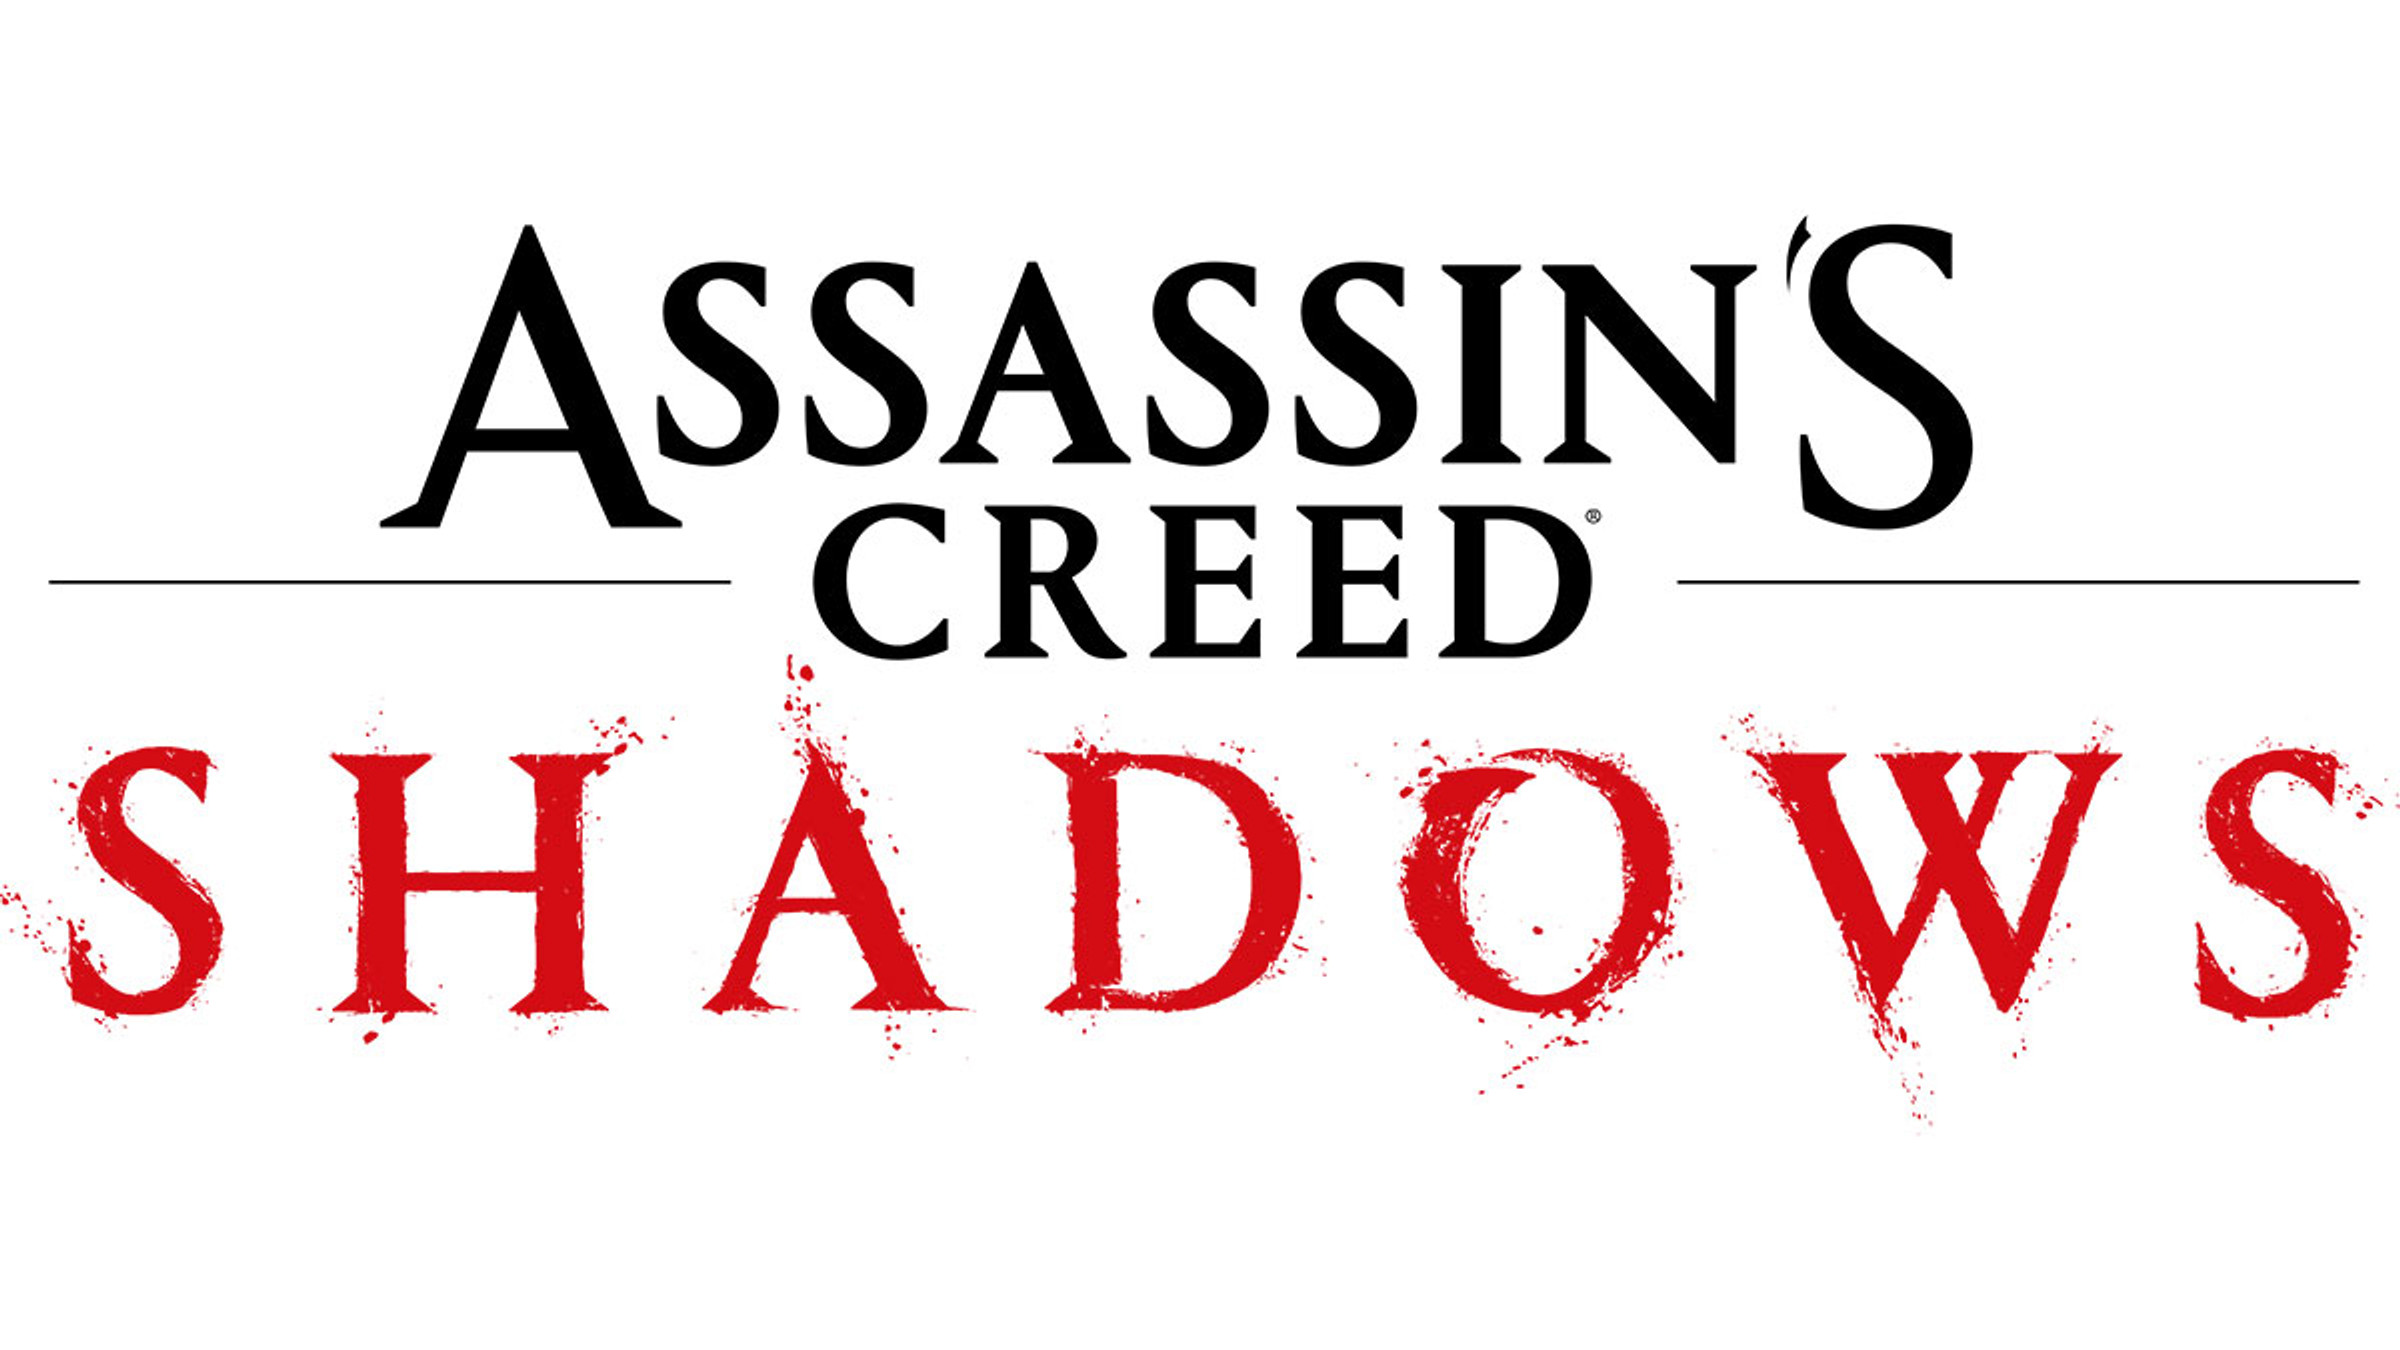 assassins-creed-shadow-code-red-info-bande-annonce-trailer